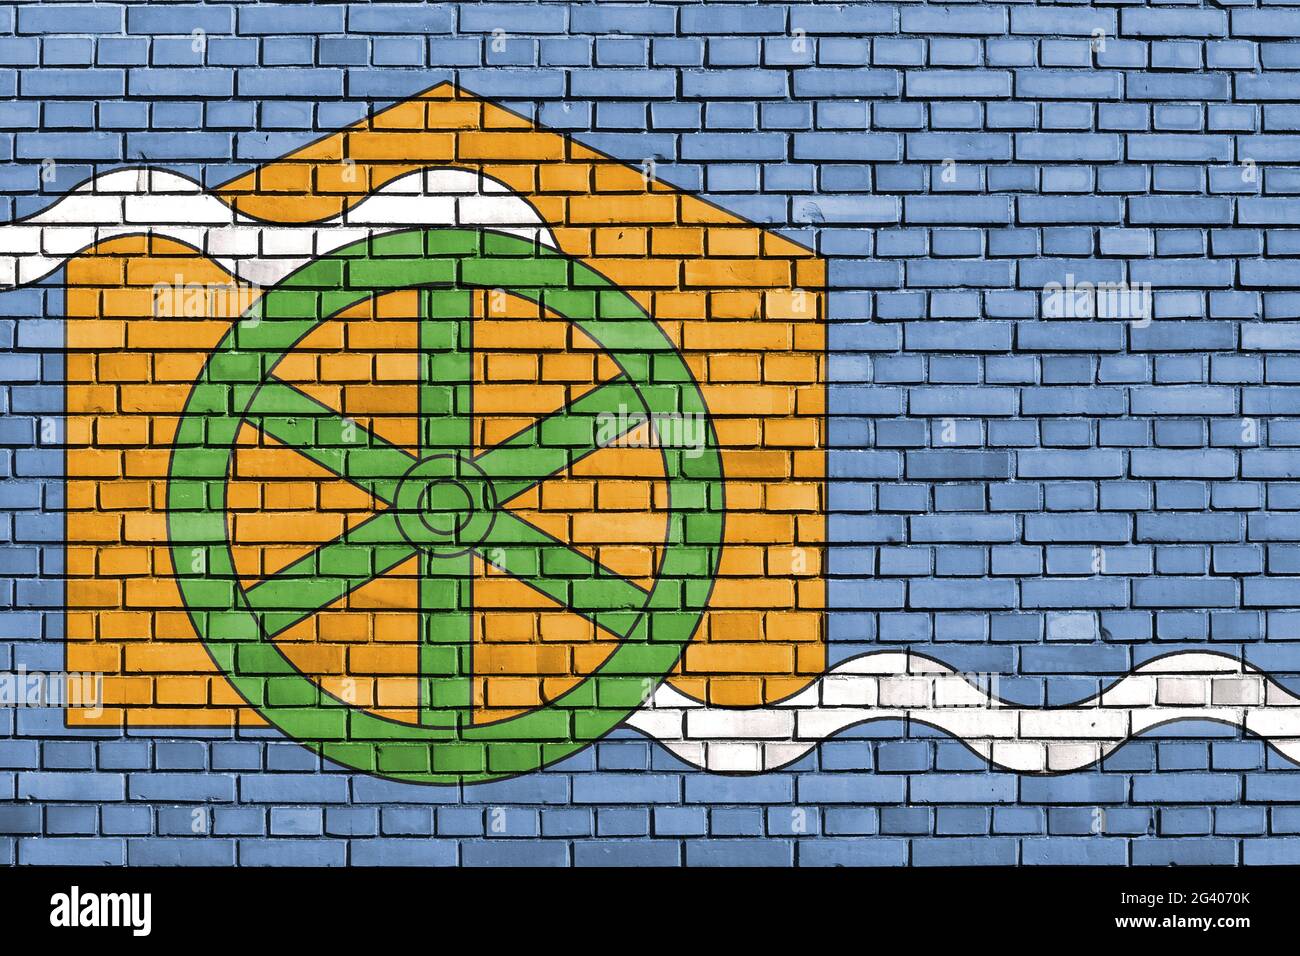 Flag of Cromford painted on brick wall Stock Photo